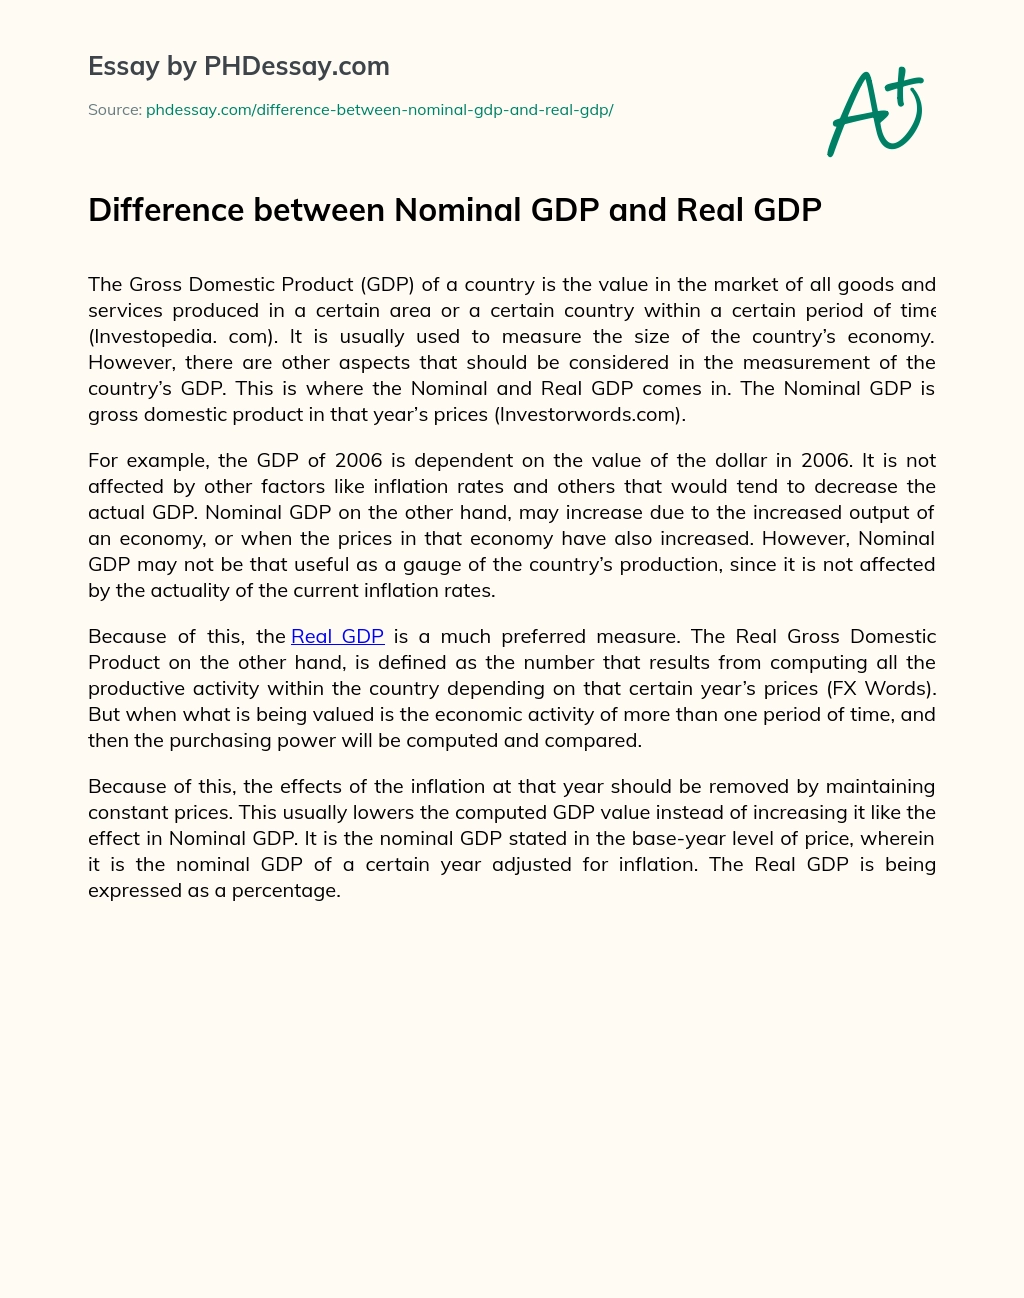 Difference between Nominal GDP and Real GDP essay